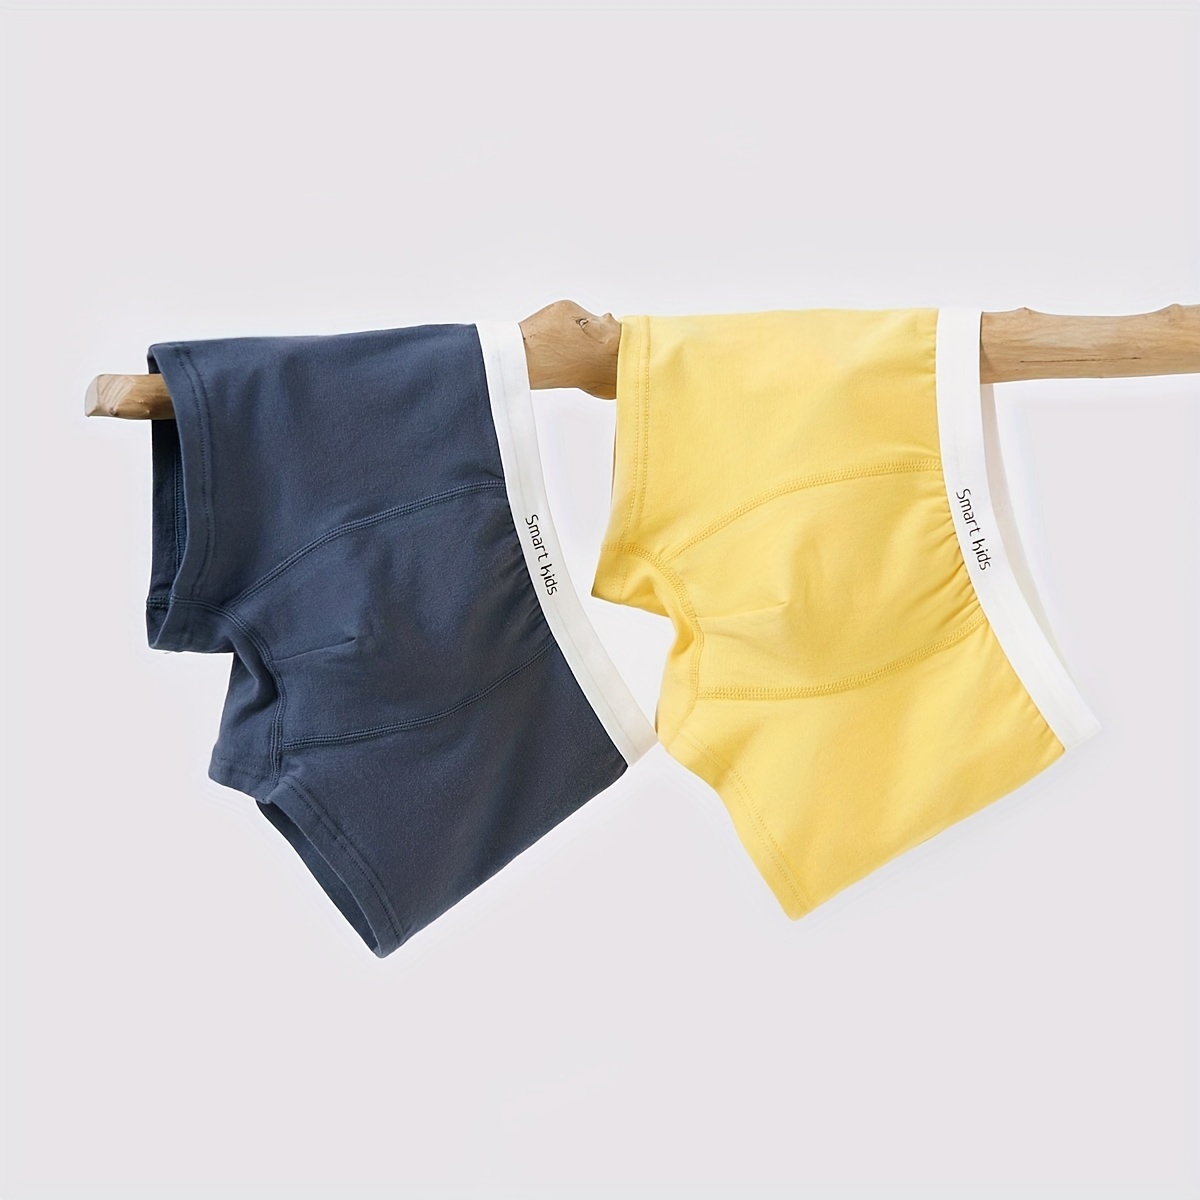 Breathable Cotton Boxer Briefs For Boys Sizes M 3XL Ideal For 12 15 Years  Old Cotton Underwear For Teenagers Panty Shorts Included Style #230322 From  Niao08, $9.2